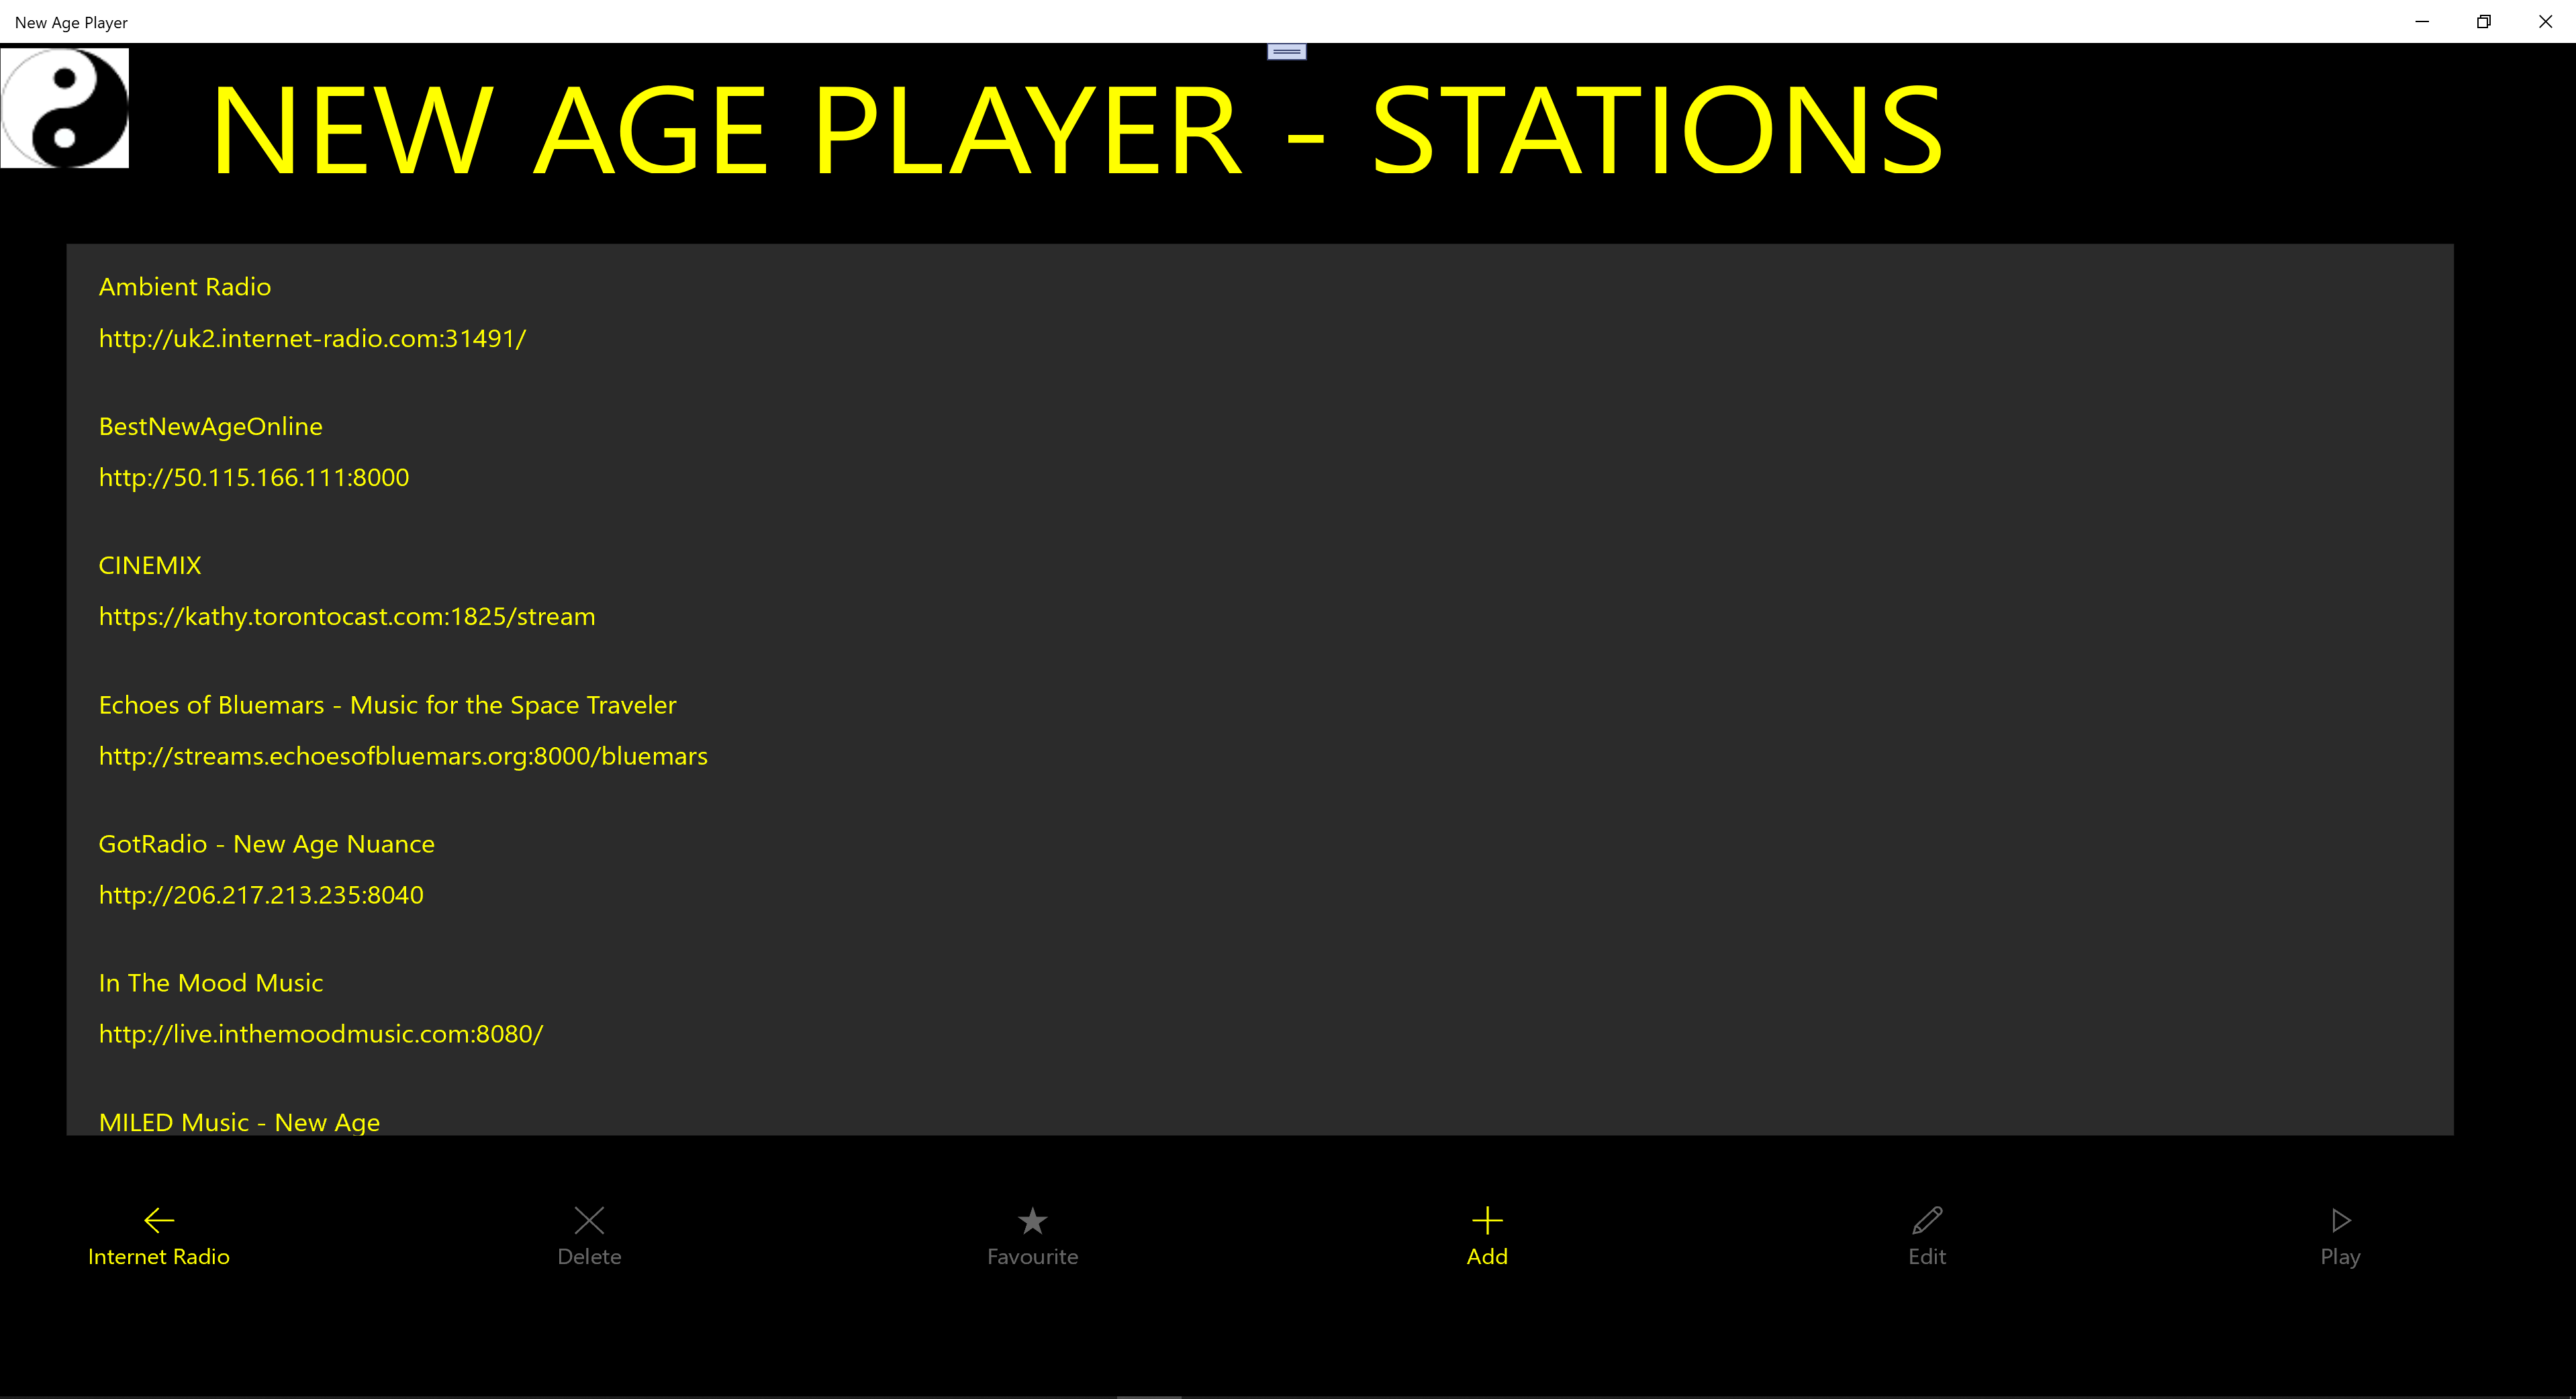 Stations screen